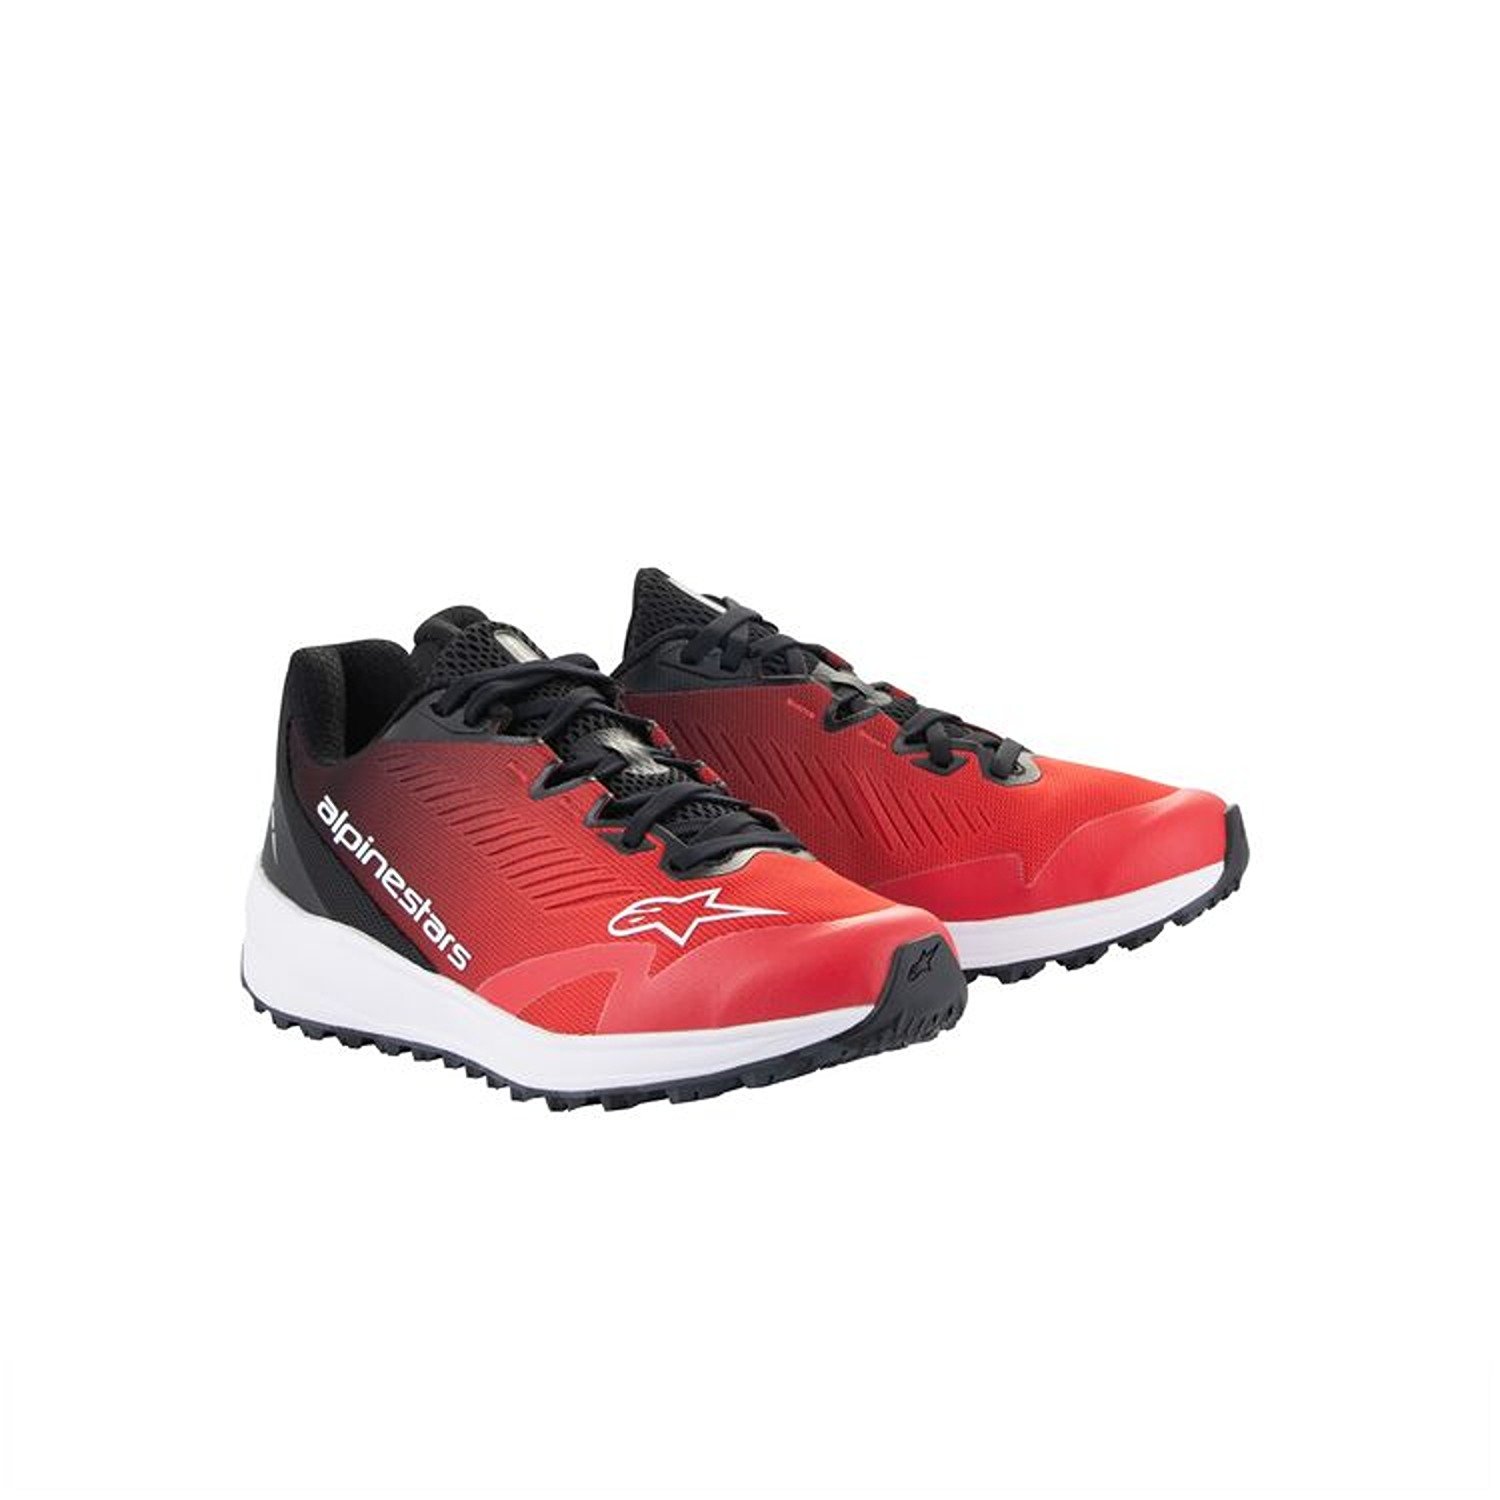 Image of Alpinestars Meta Road V2 Shoes Red Black White Taille US 75